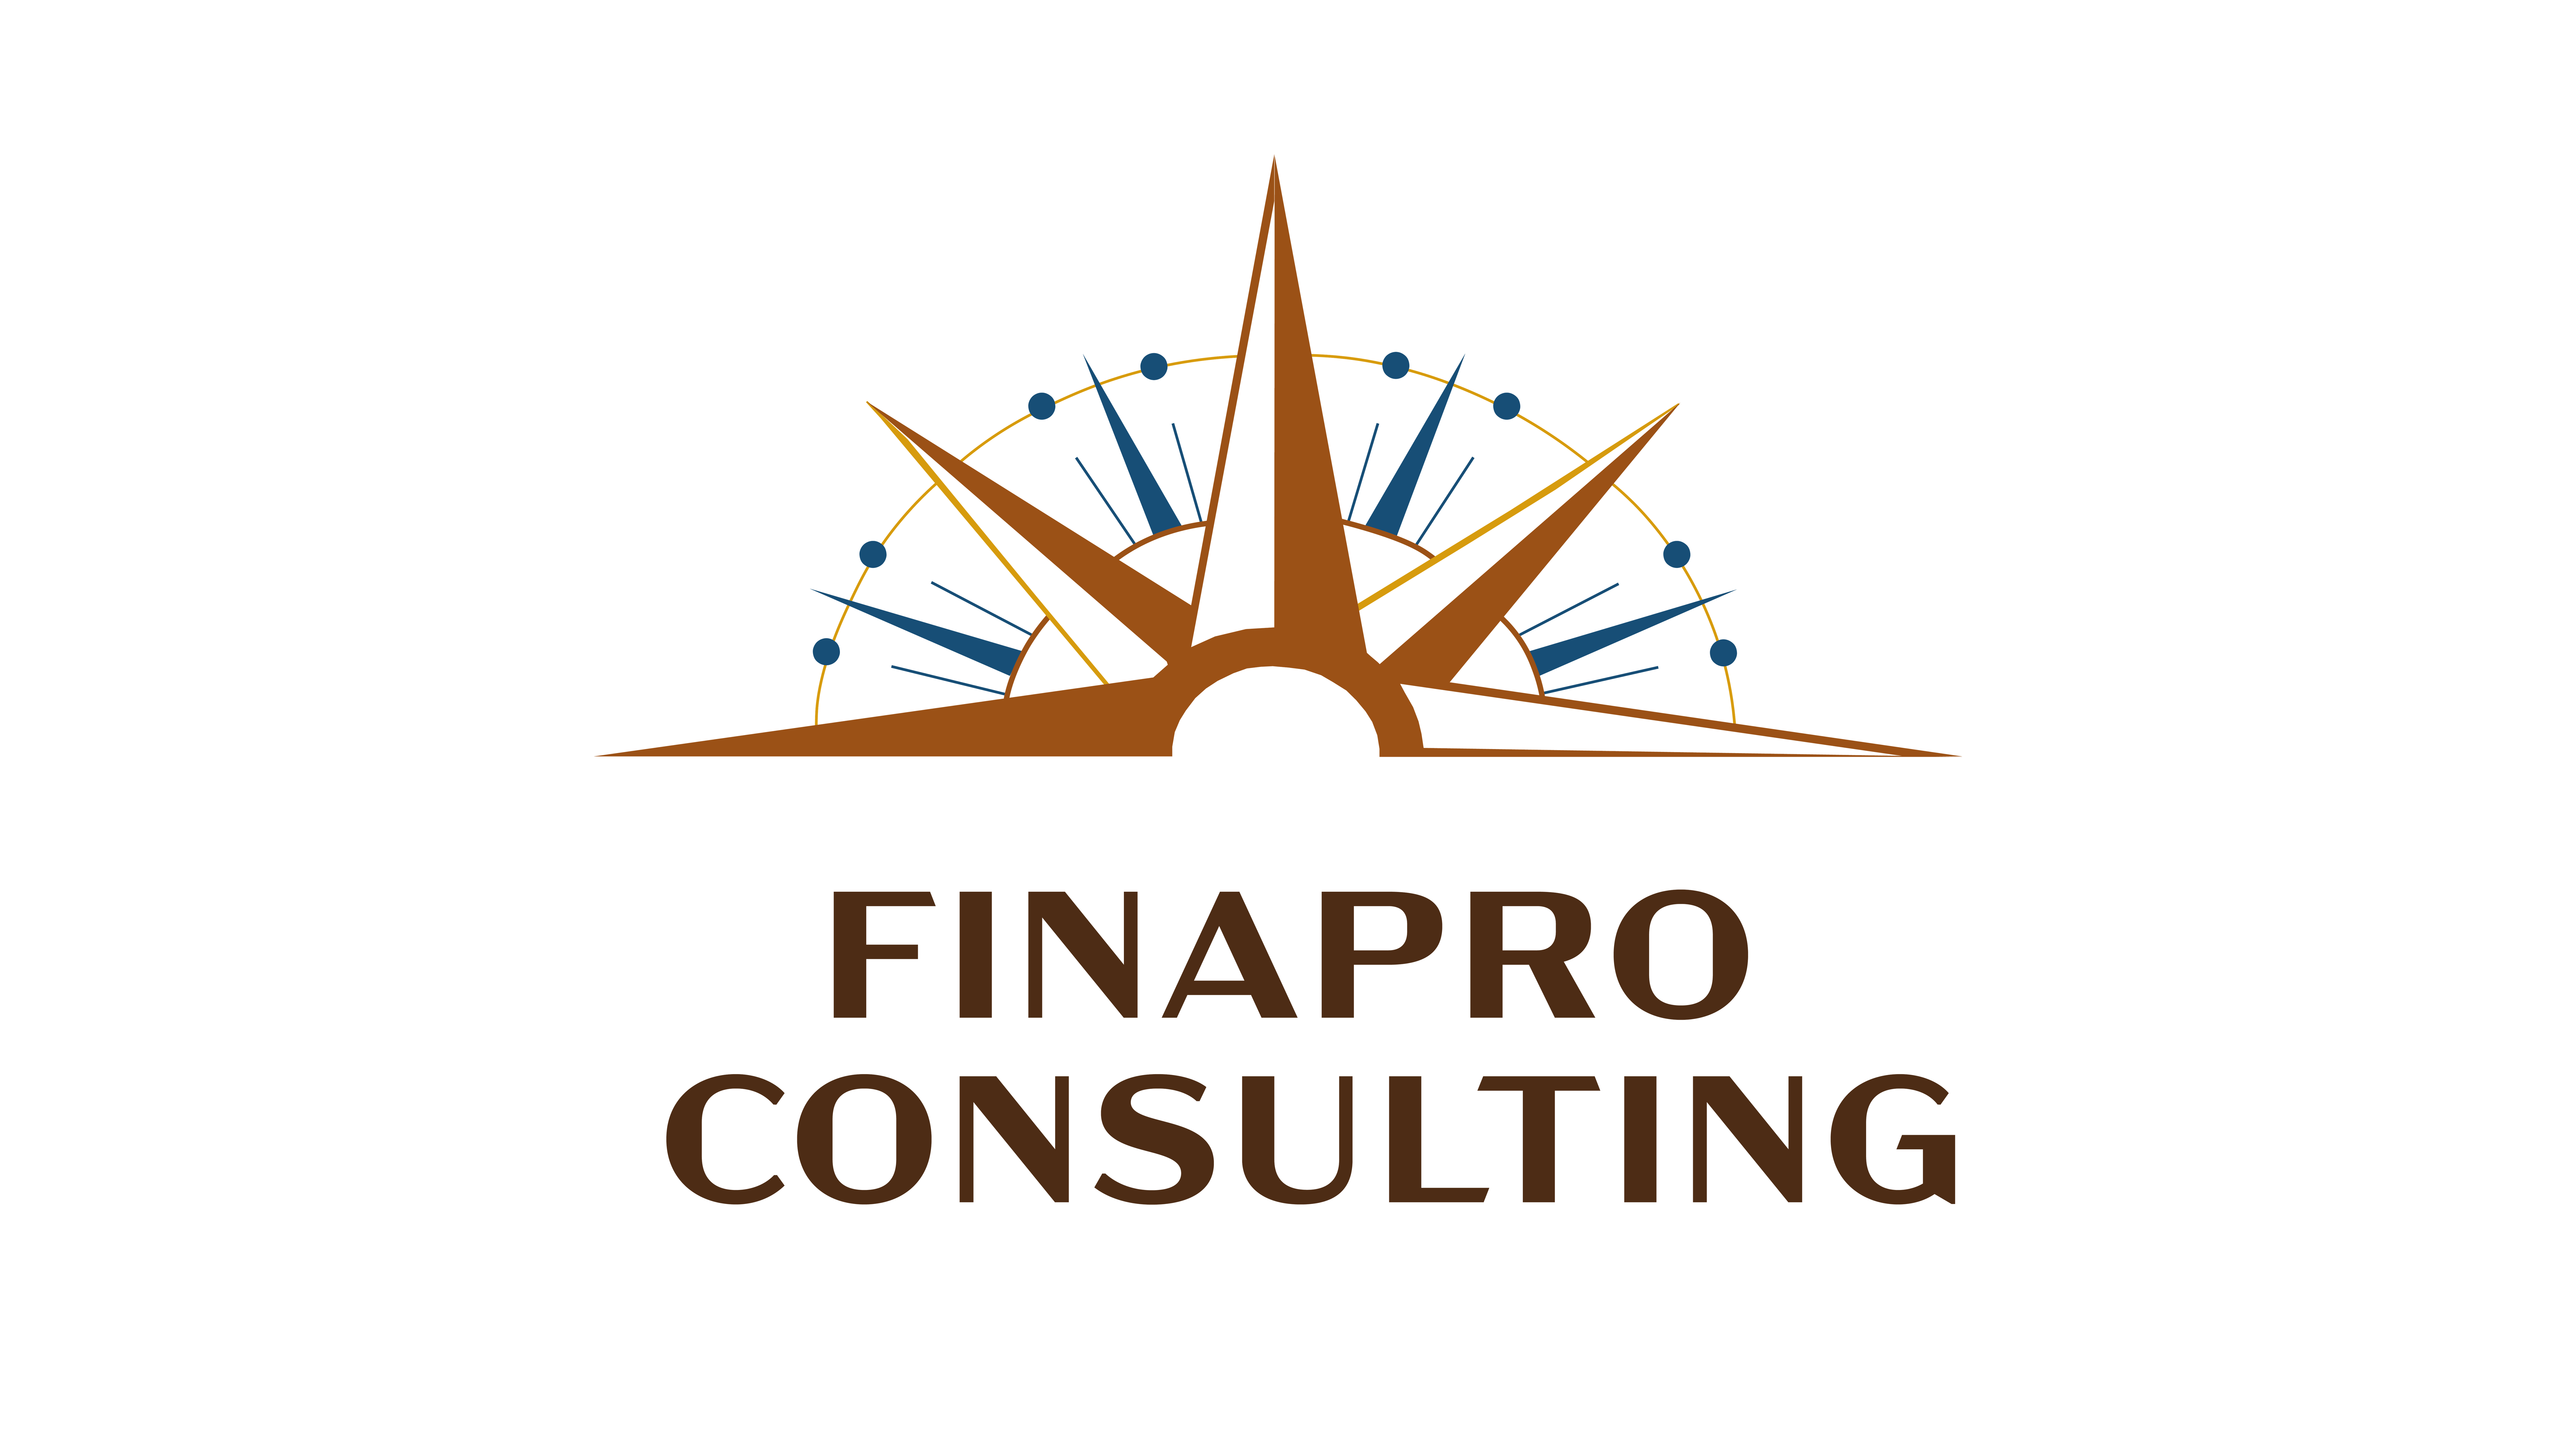 Finapro consulting